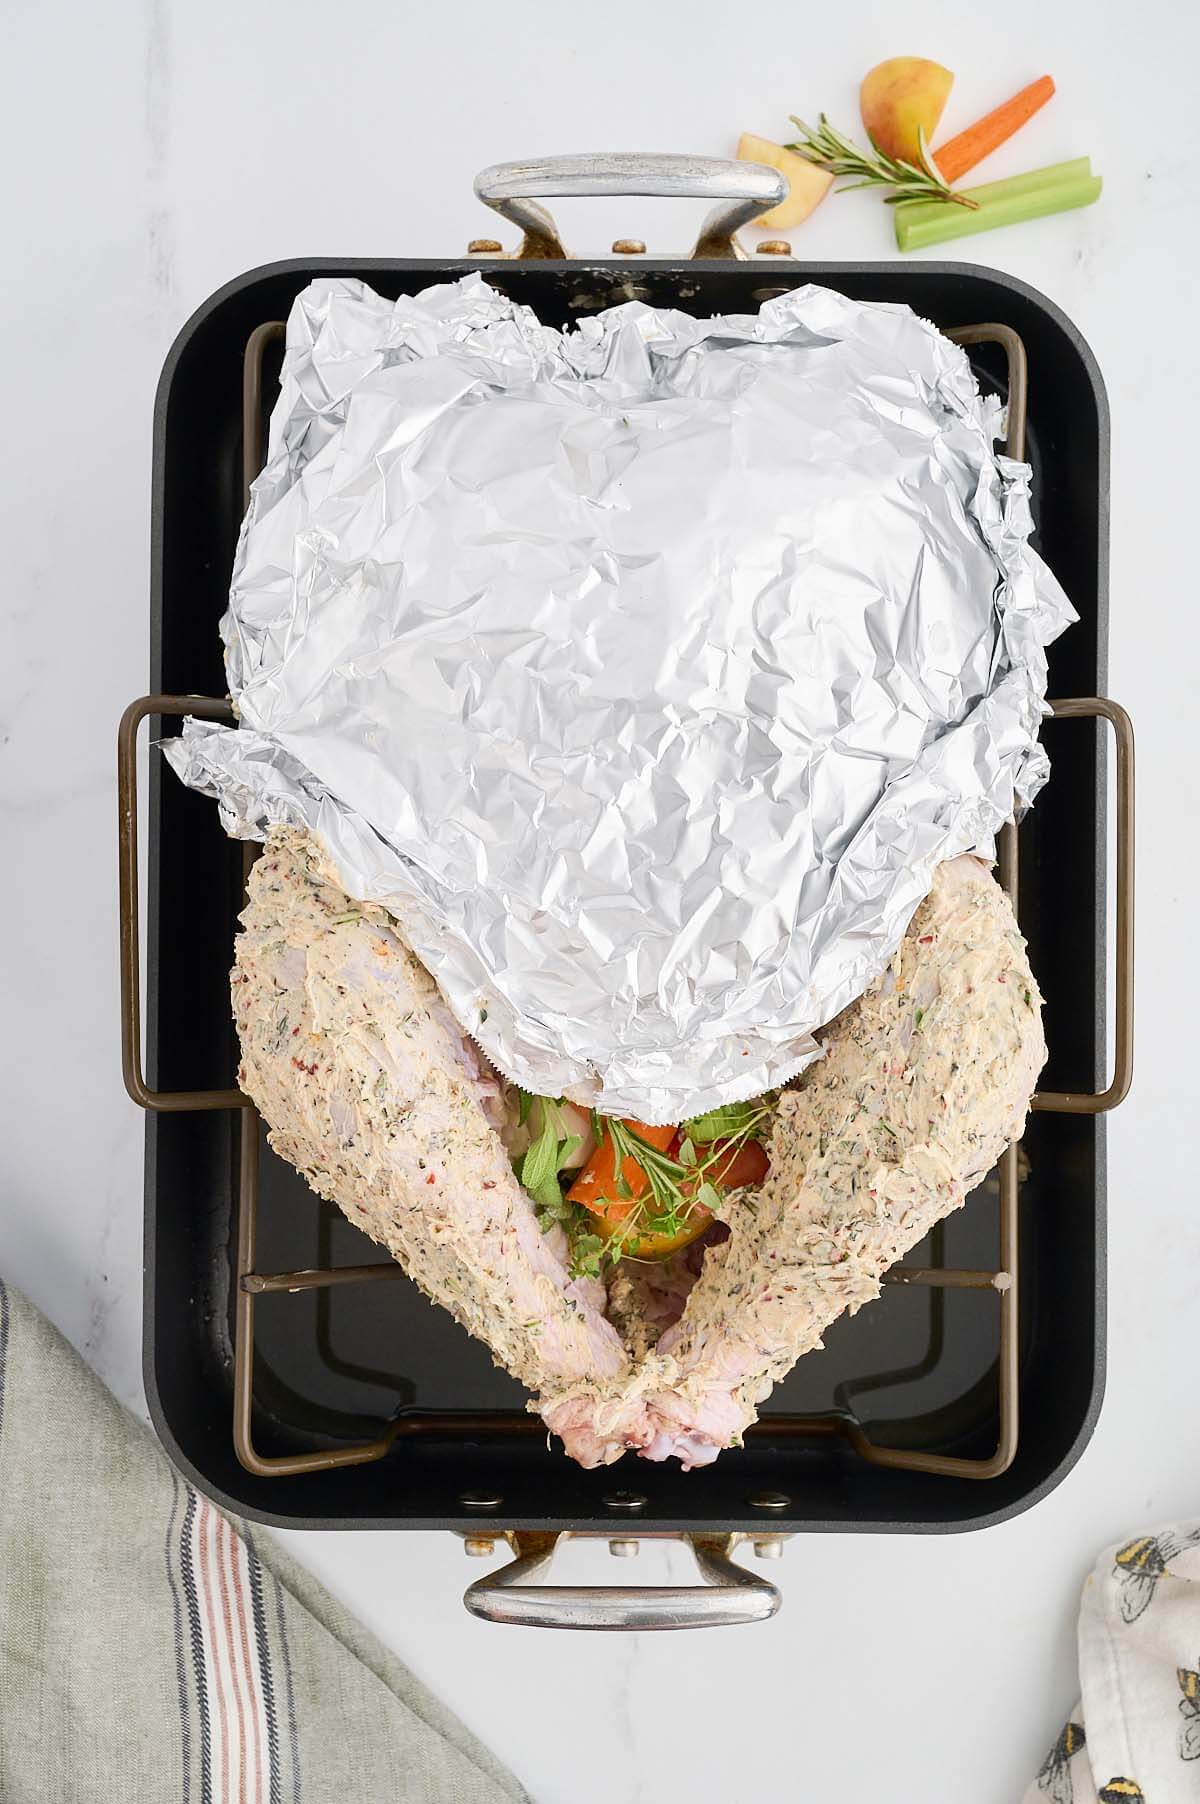 foil covering a turkey breast.